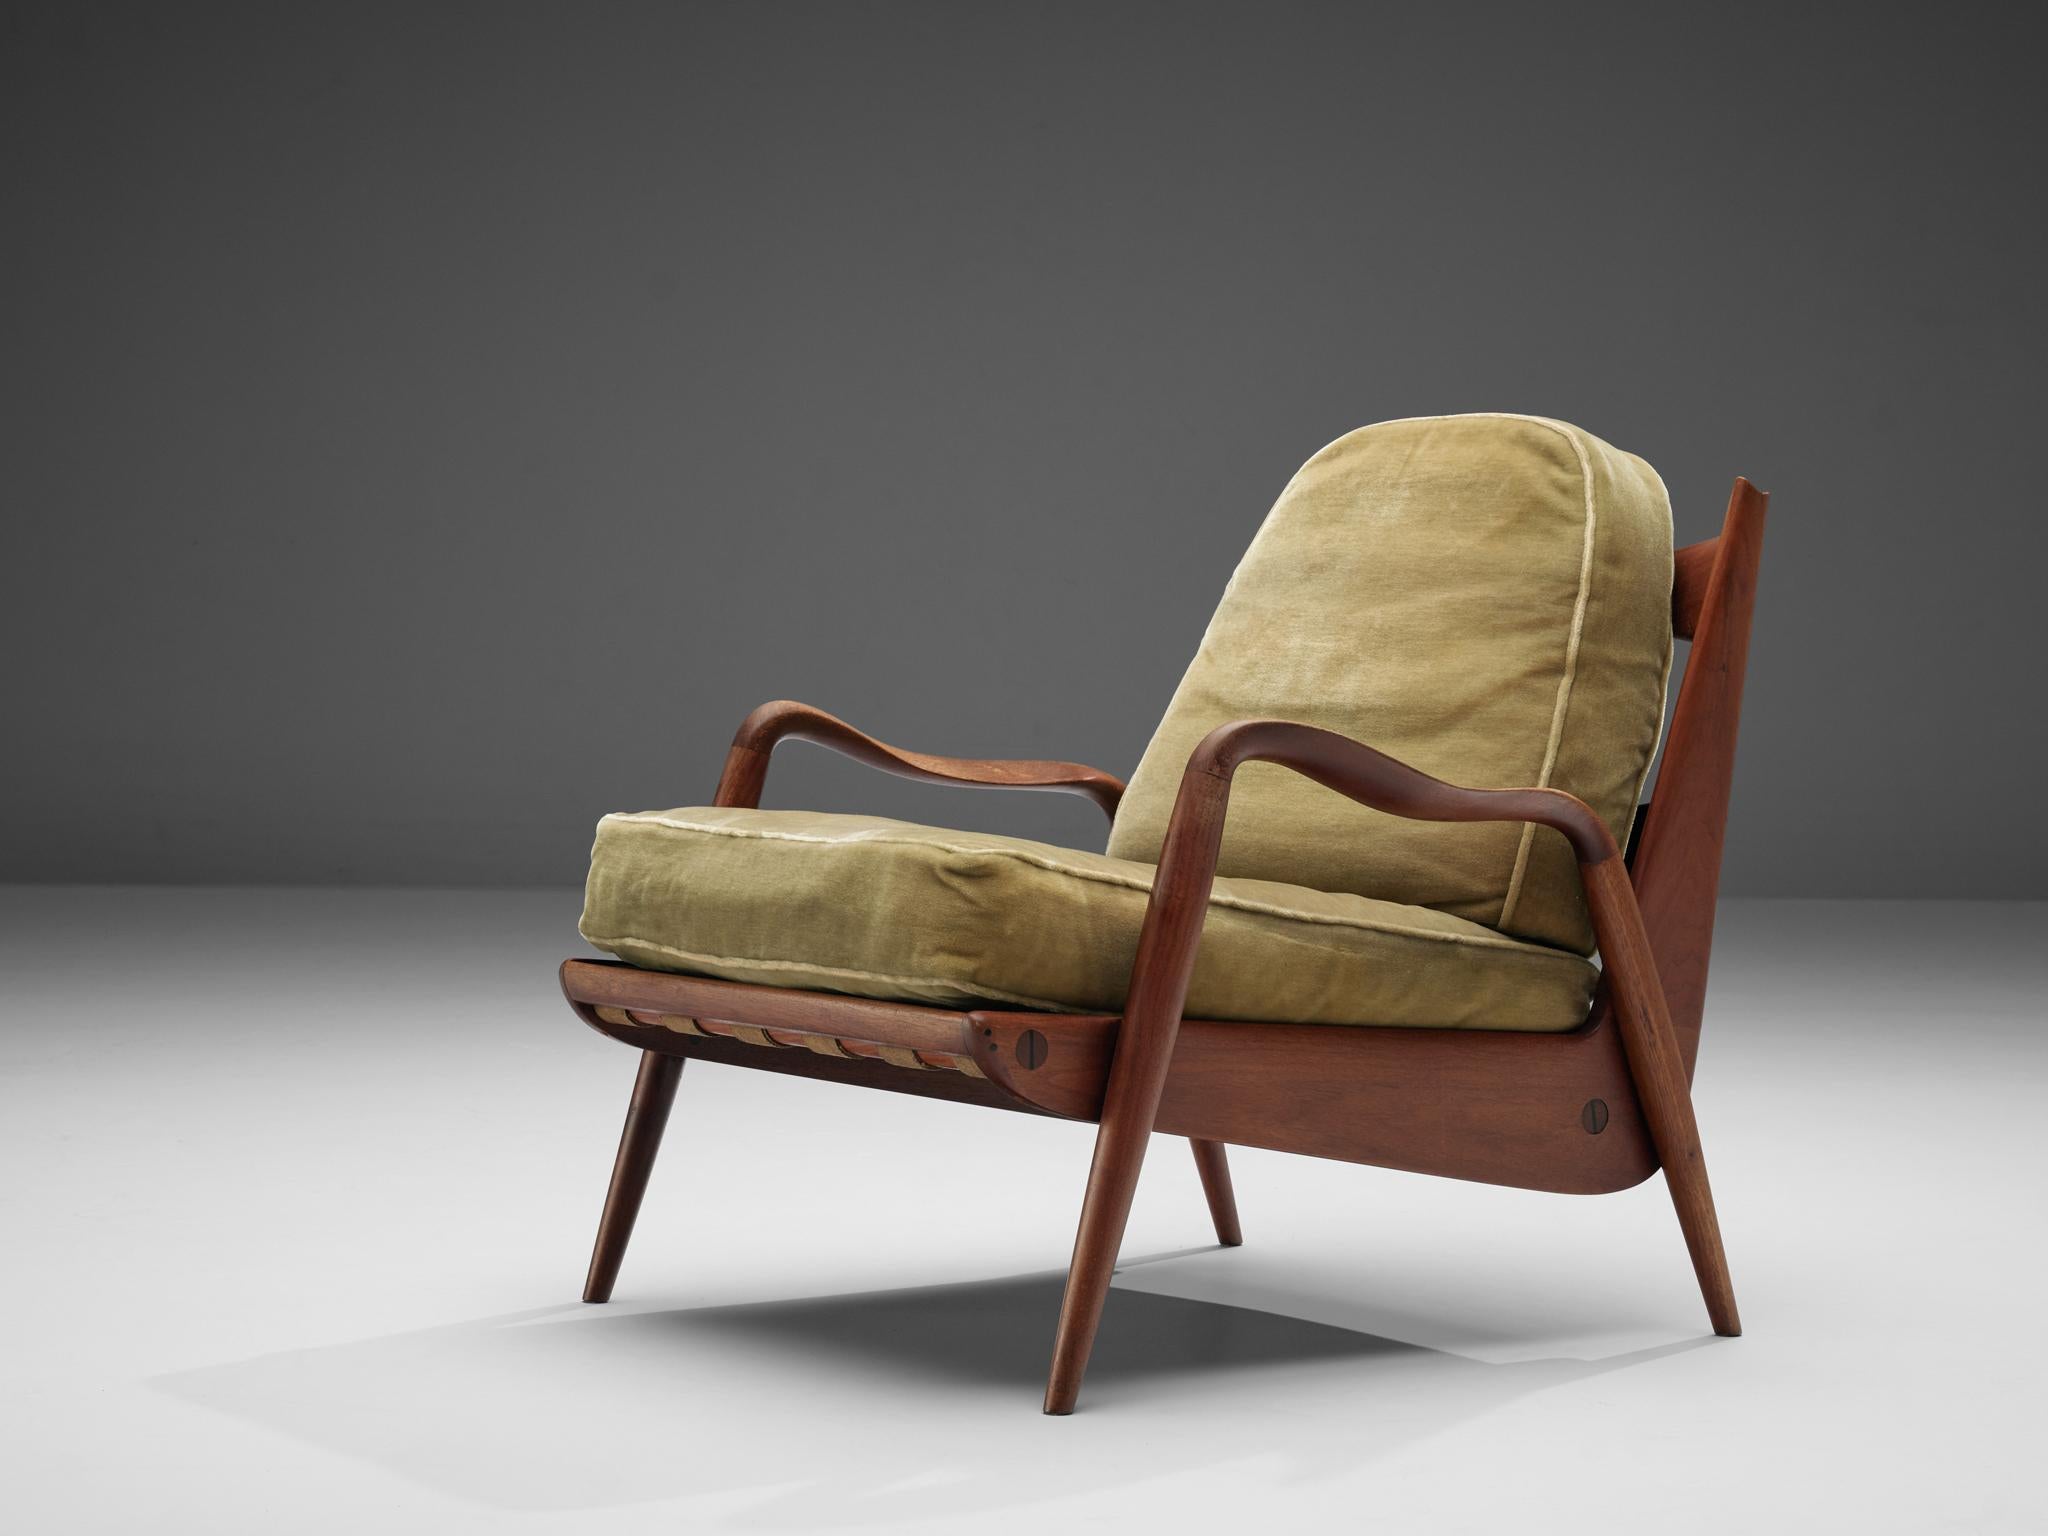 Philip Lloyd Powell, 'New Hope' lounge chair, American walnut and green= fabric, United States, 1960s.

This comfortable armchair made out of American walnut and fabric upholstery is designed by Philip Lloyd Powell. The name 'New Hope' refers to the